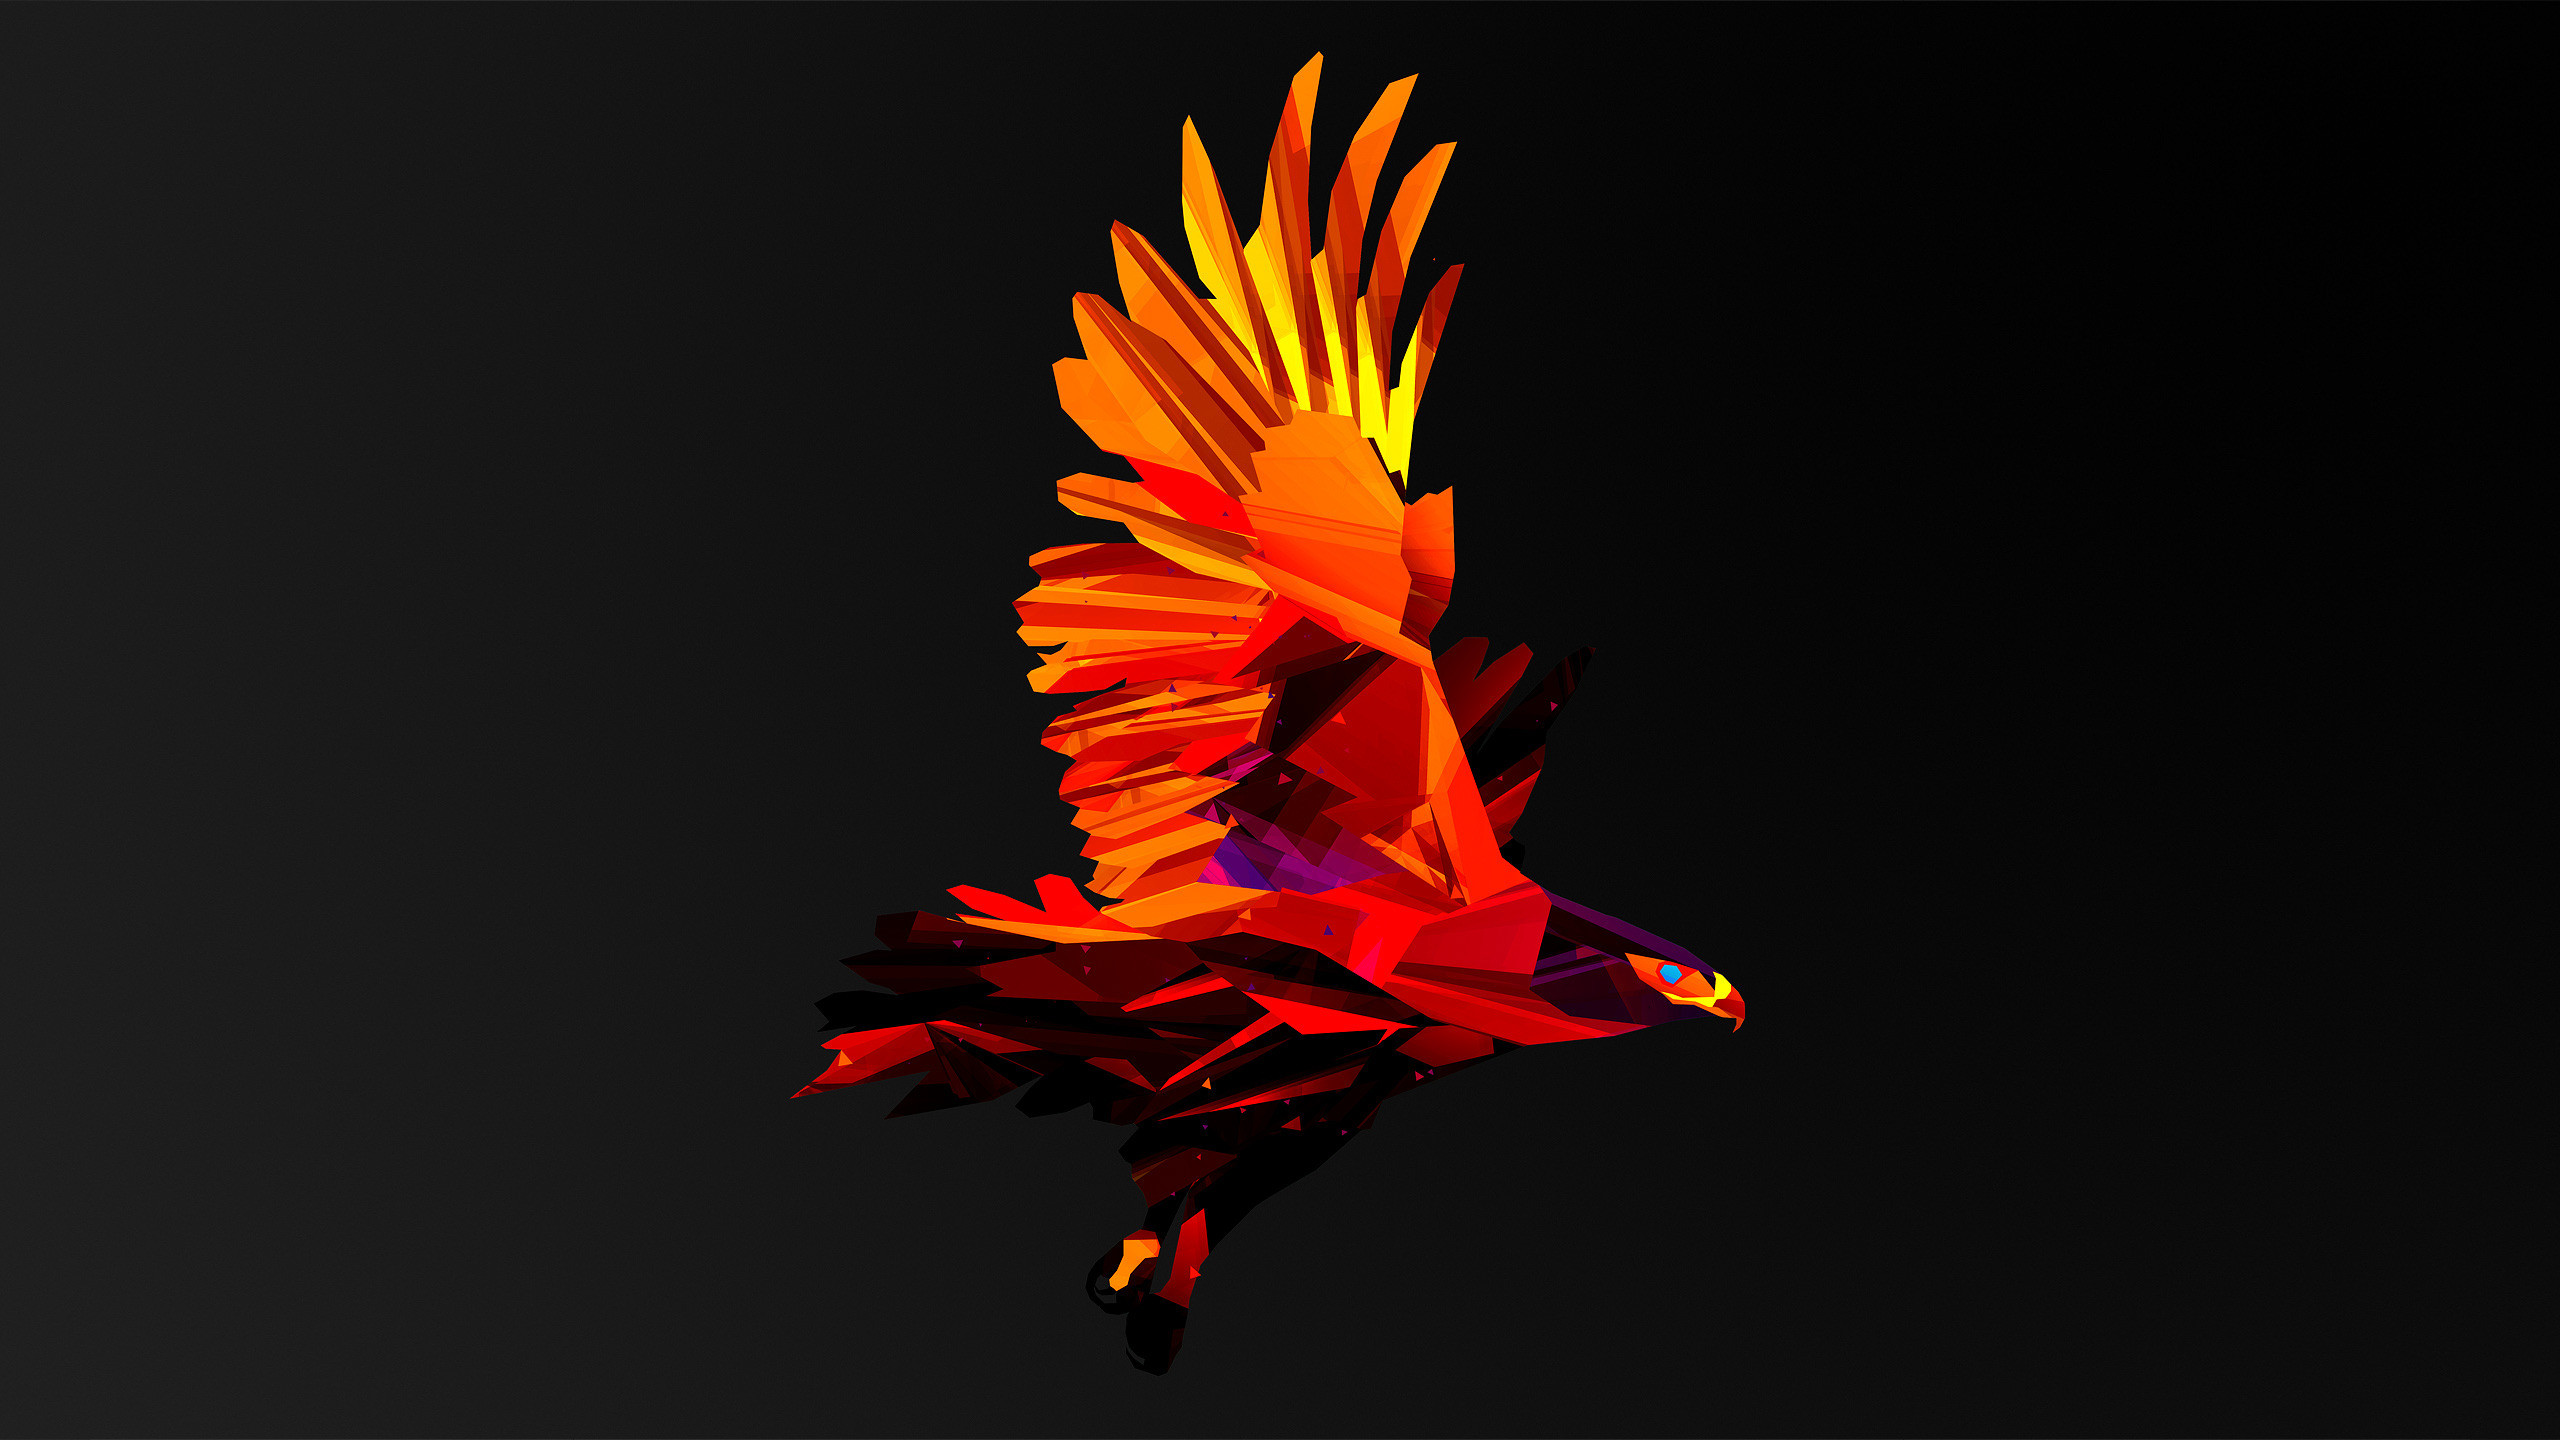 2560x1440 low poly wallpaper - Pesquisa Google | Low Poly Art // | Pinterest |  Dragons, Wallpaper and Low poly